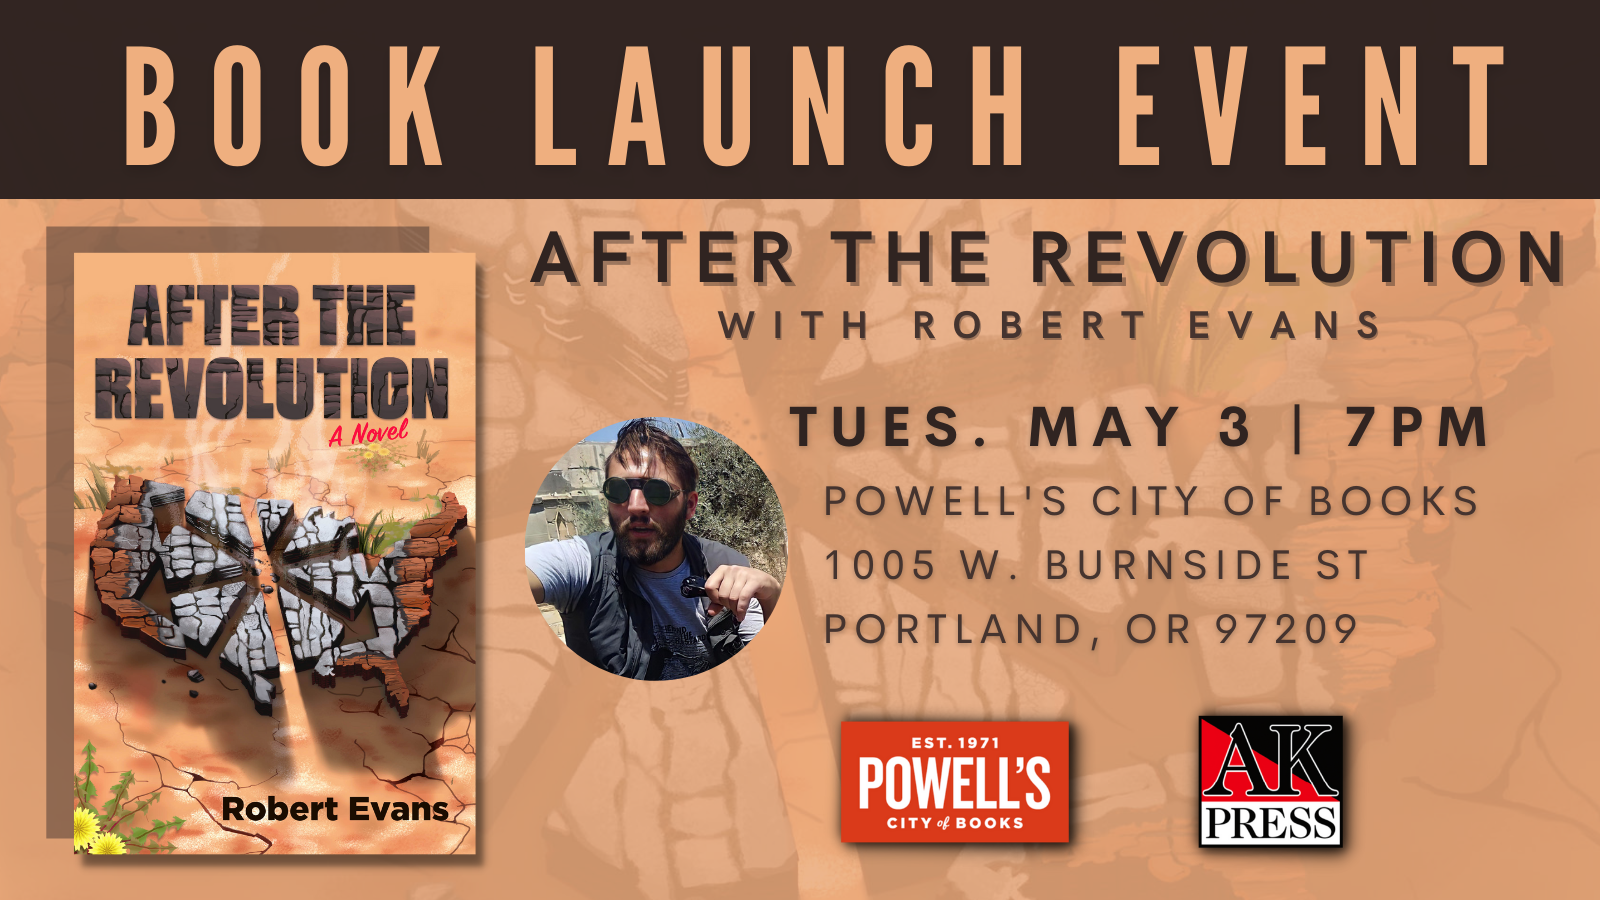 Graphic features the front cover of After the Revolution, depicting the united states separated by a chaos star, cracked, and burnt in the desert. Text on the cover reads, "After the Revolution: A Novel by Robert Evans" Next to the cover is a headshot of Robert Evans and the logos of AK Press and Powell's. Text on the graphic reads, "Book Launch Event After the Revolution with Robert Evans Tues. May 3 | 7pm Powell's City of Books 1005 W. Burnside St Portland, OR 97209" 